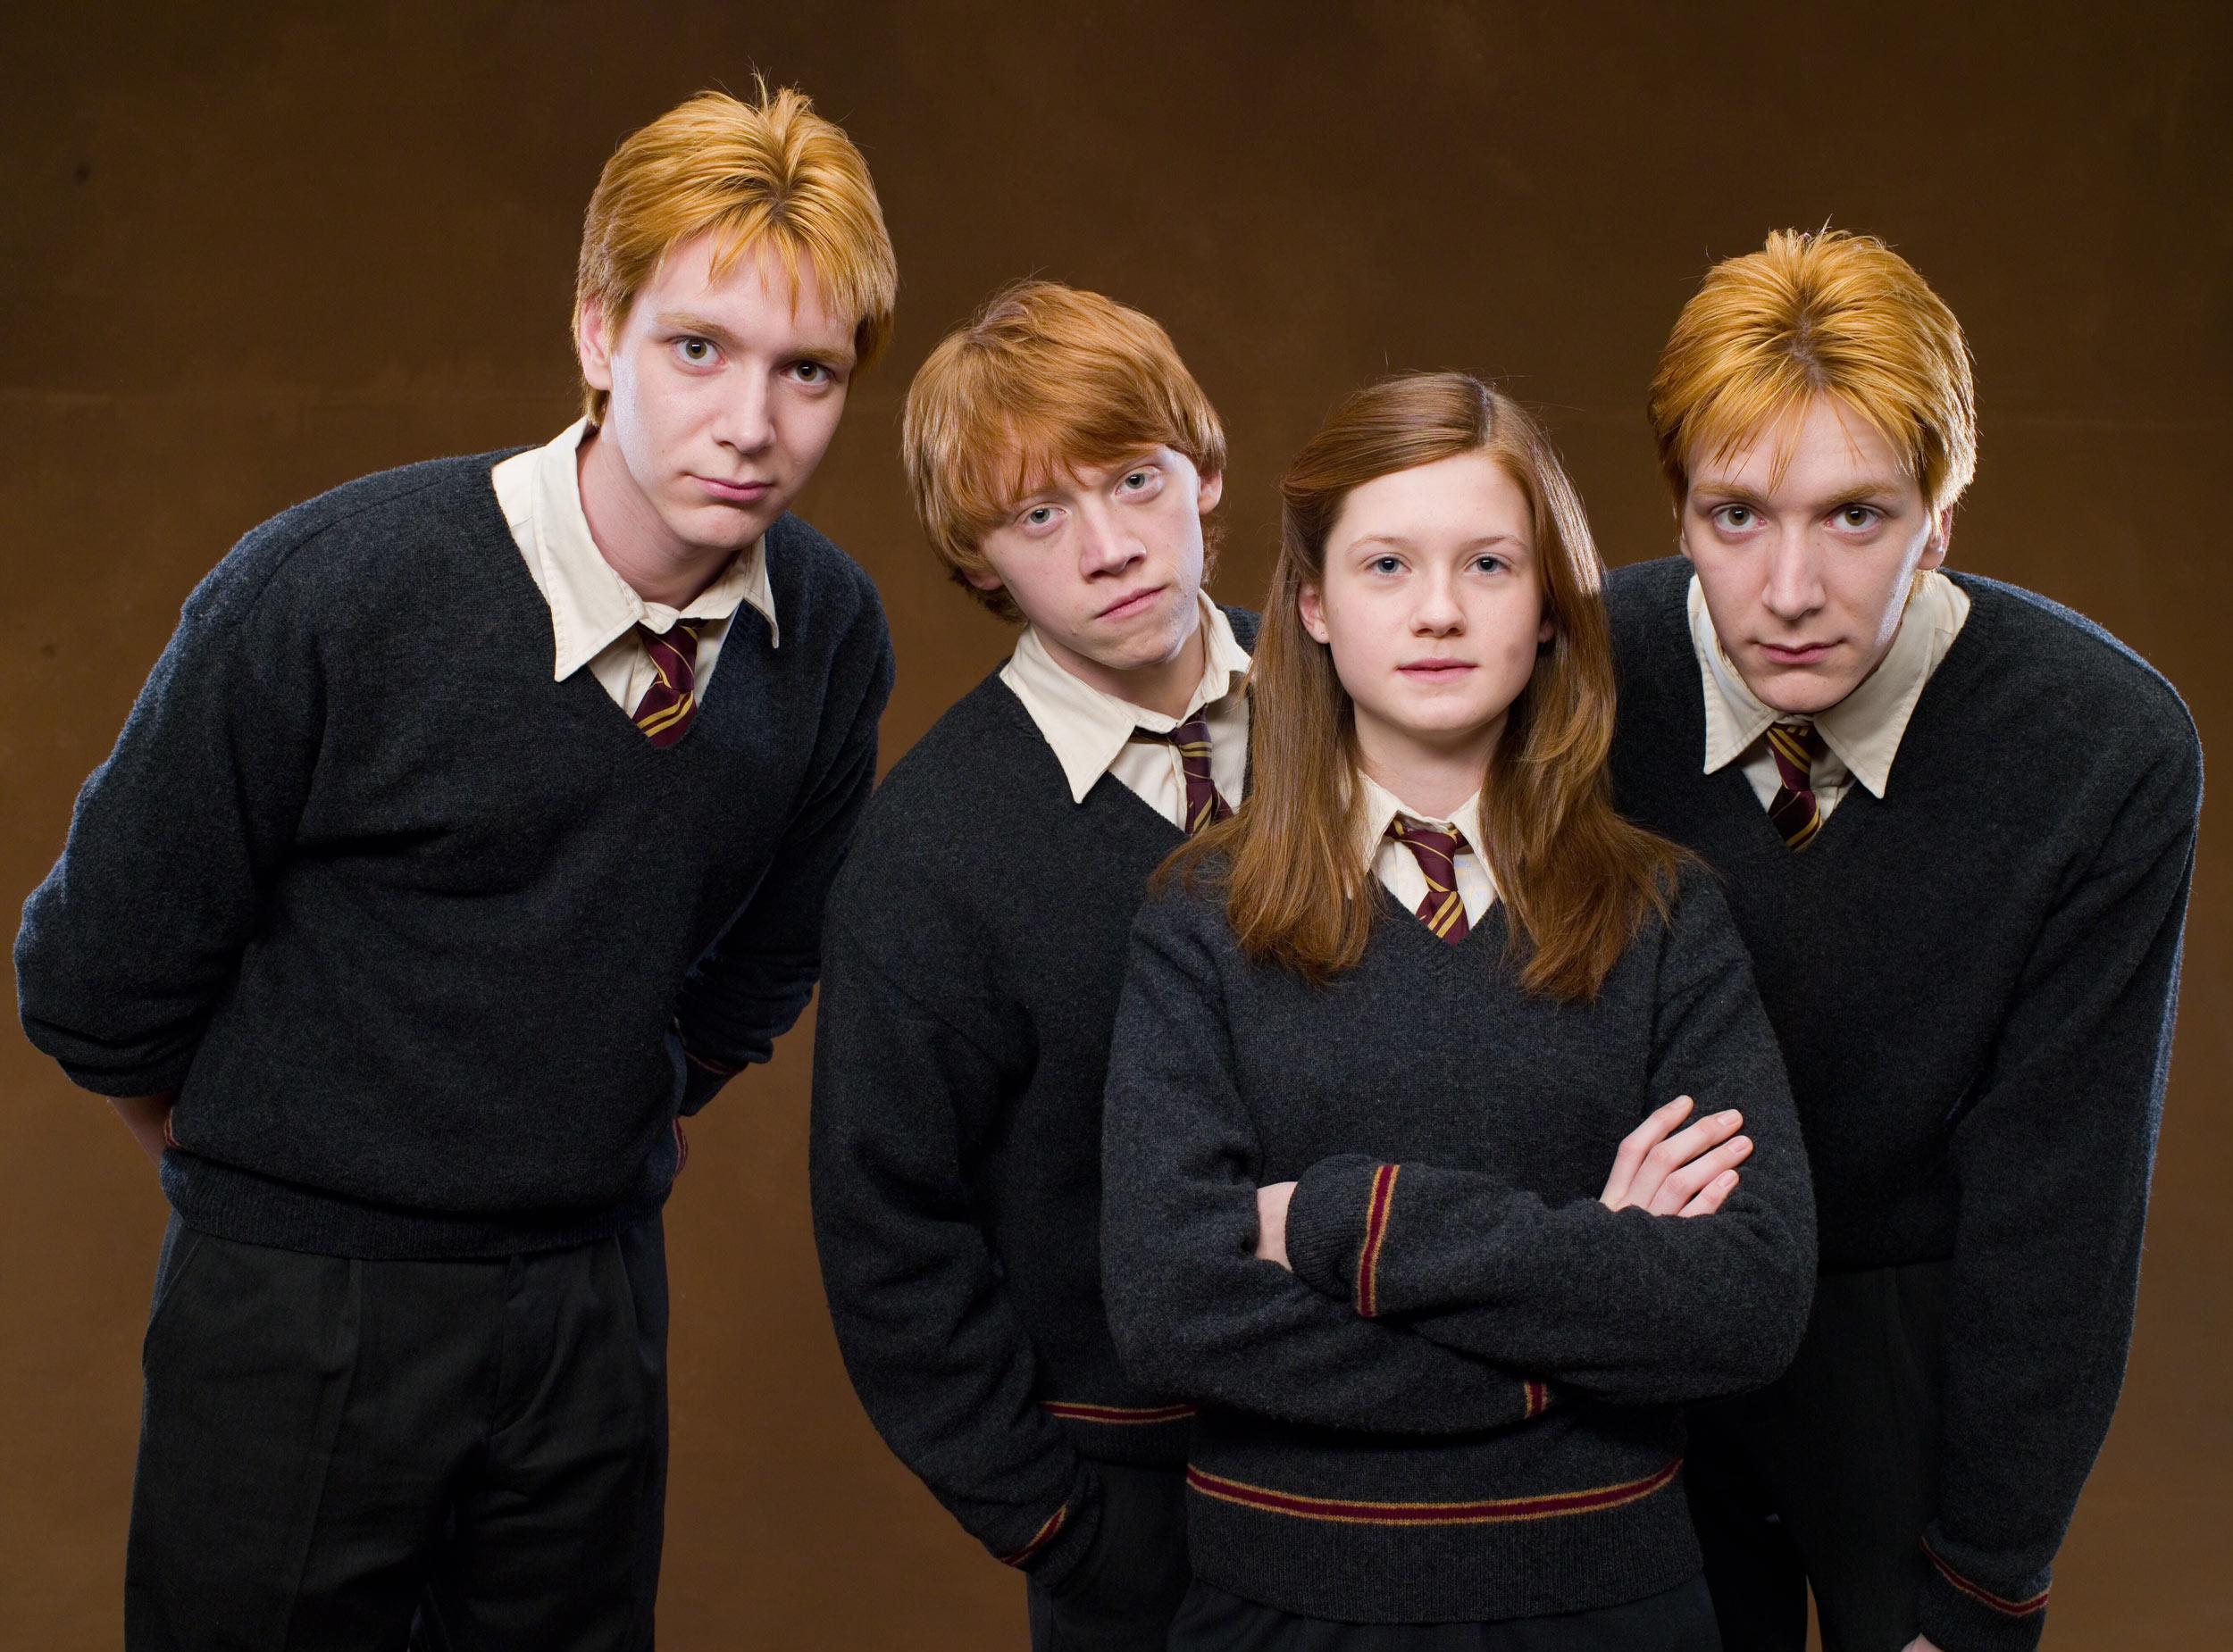 The Weasley Family Wallpapers - Wallpaper Cave.